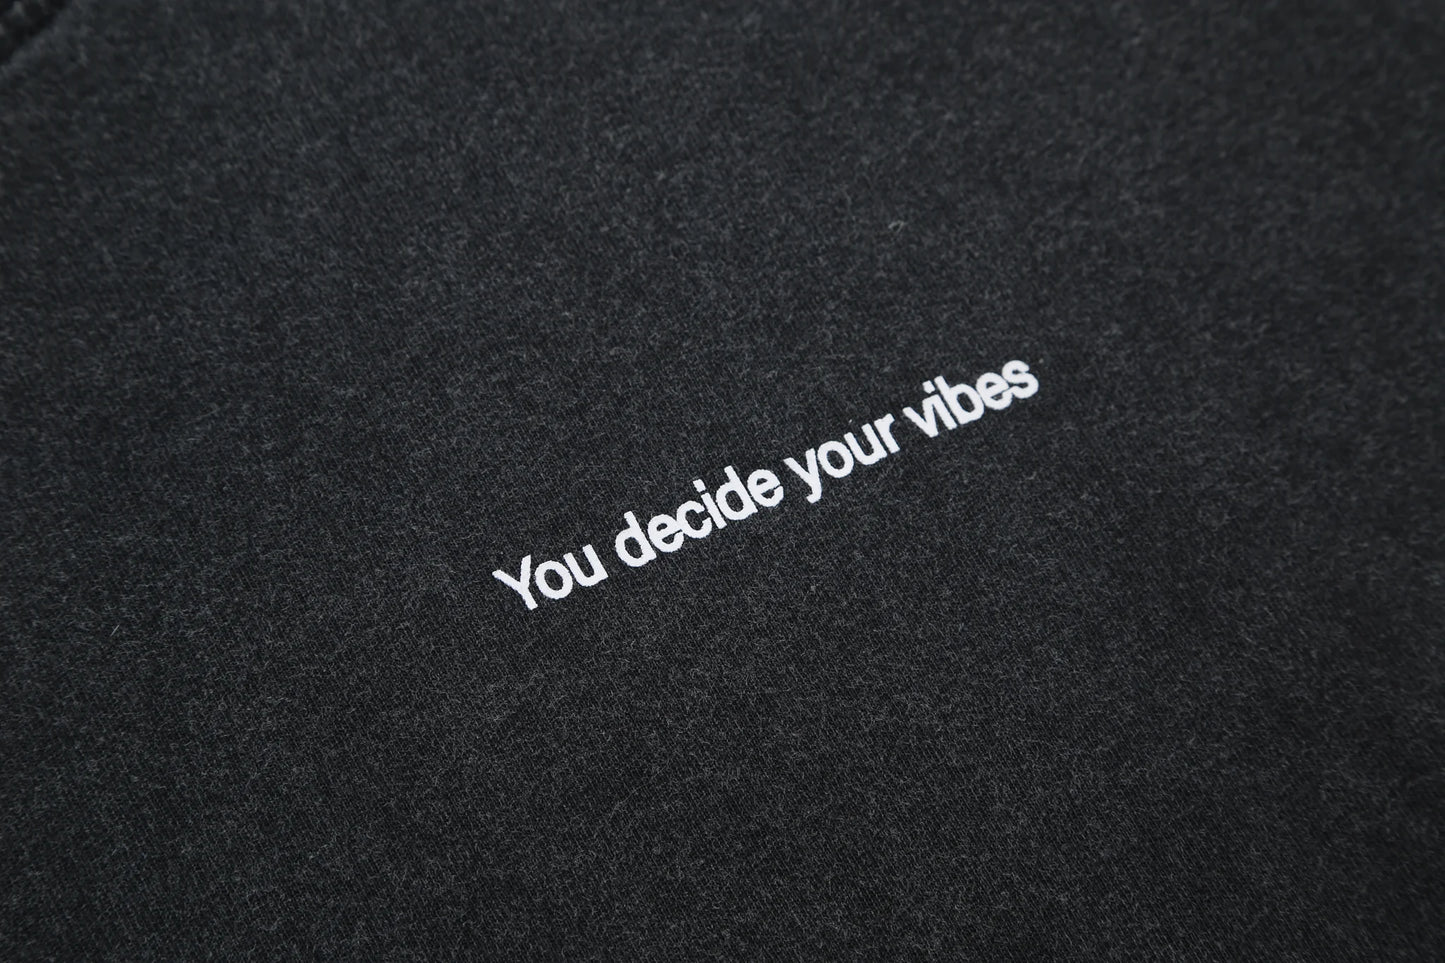 Aly Good Vibes - "You Decide Your Vibes" Tee (Black)